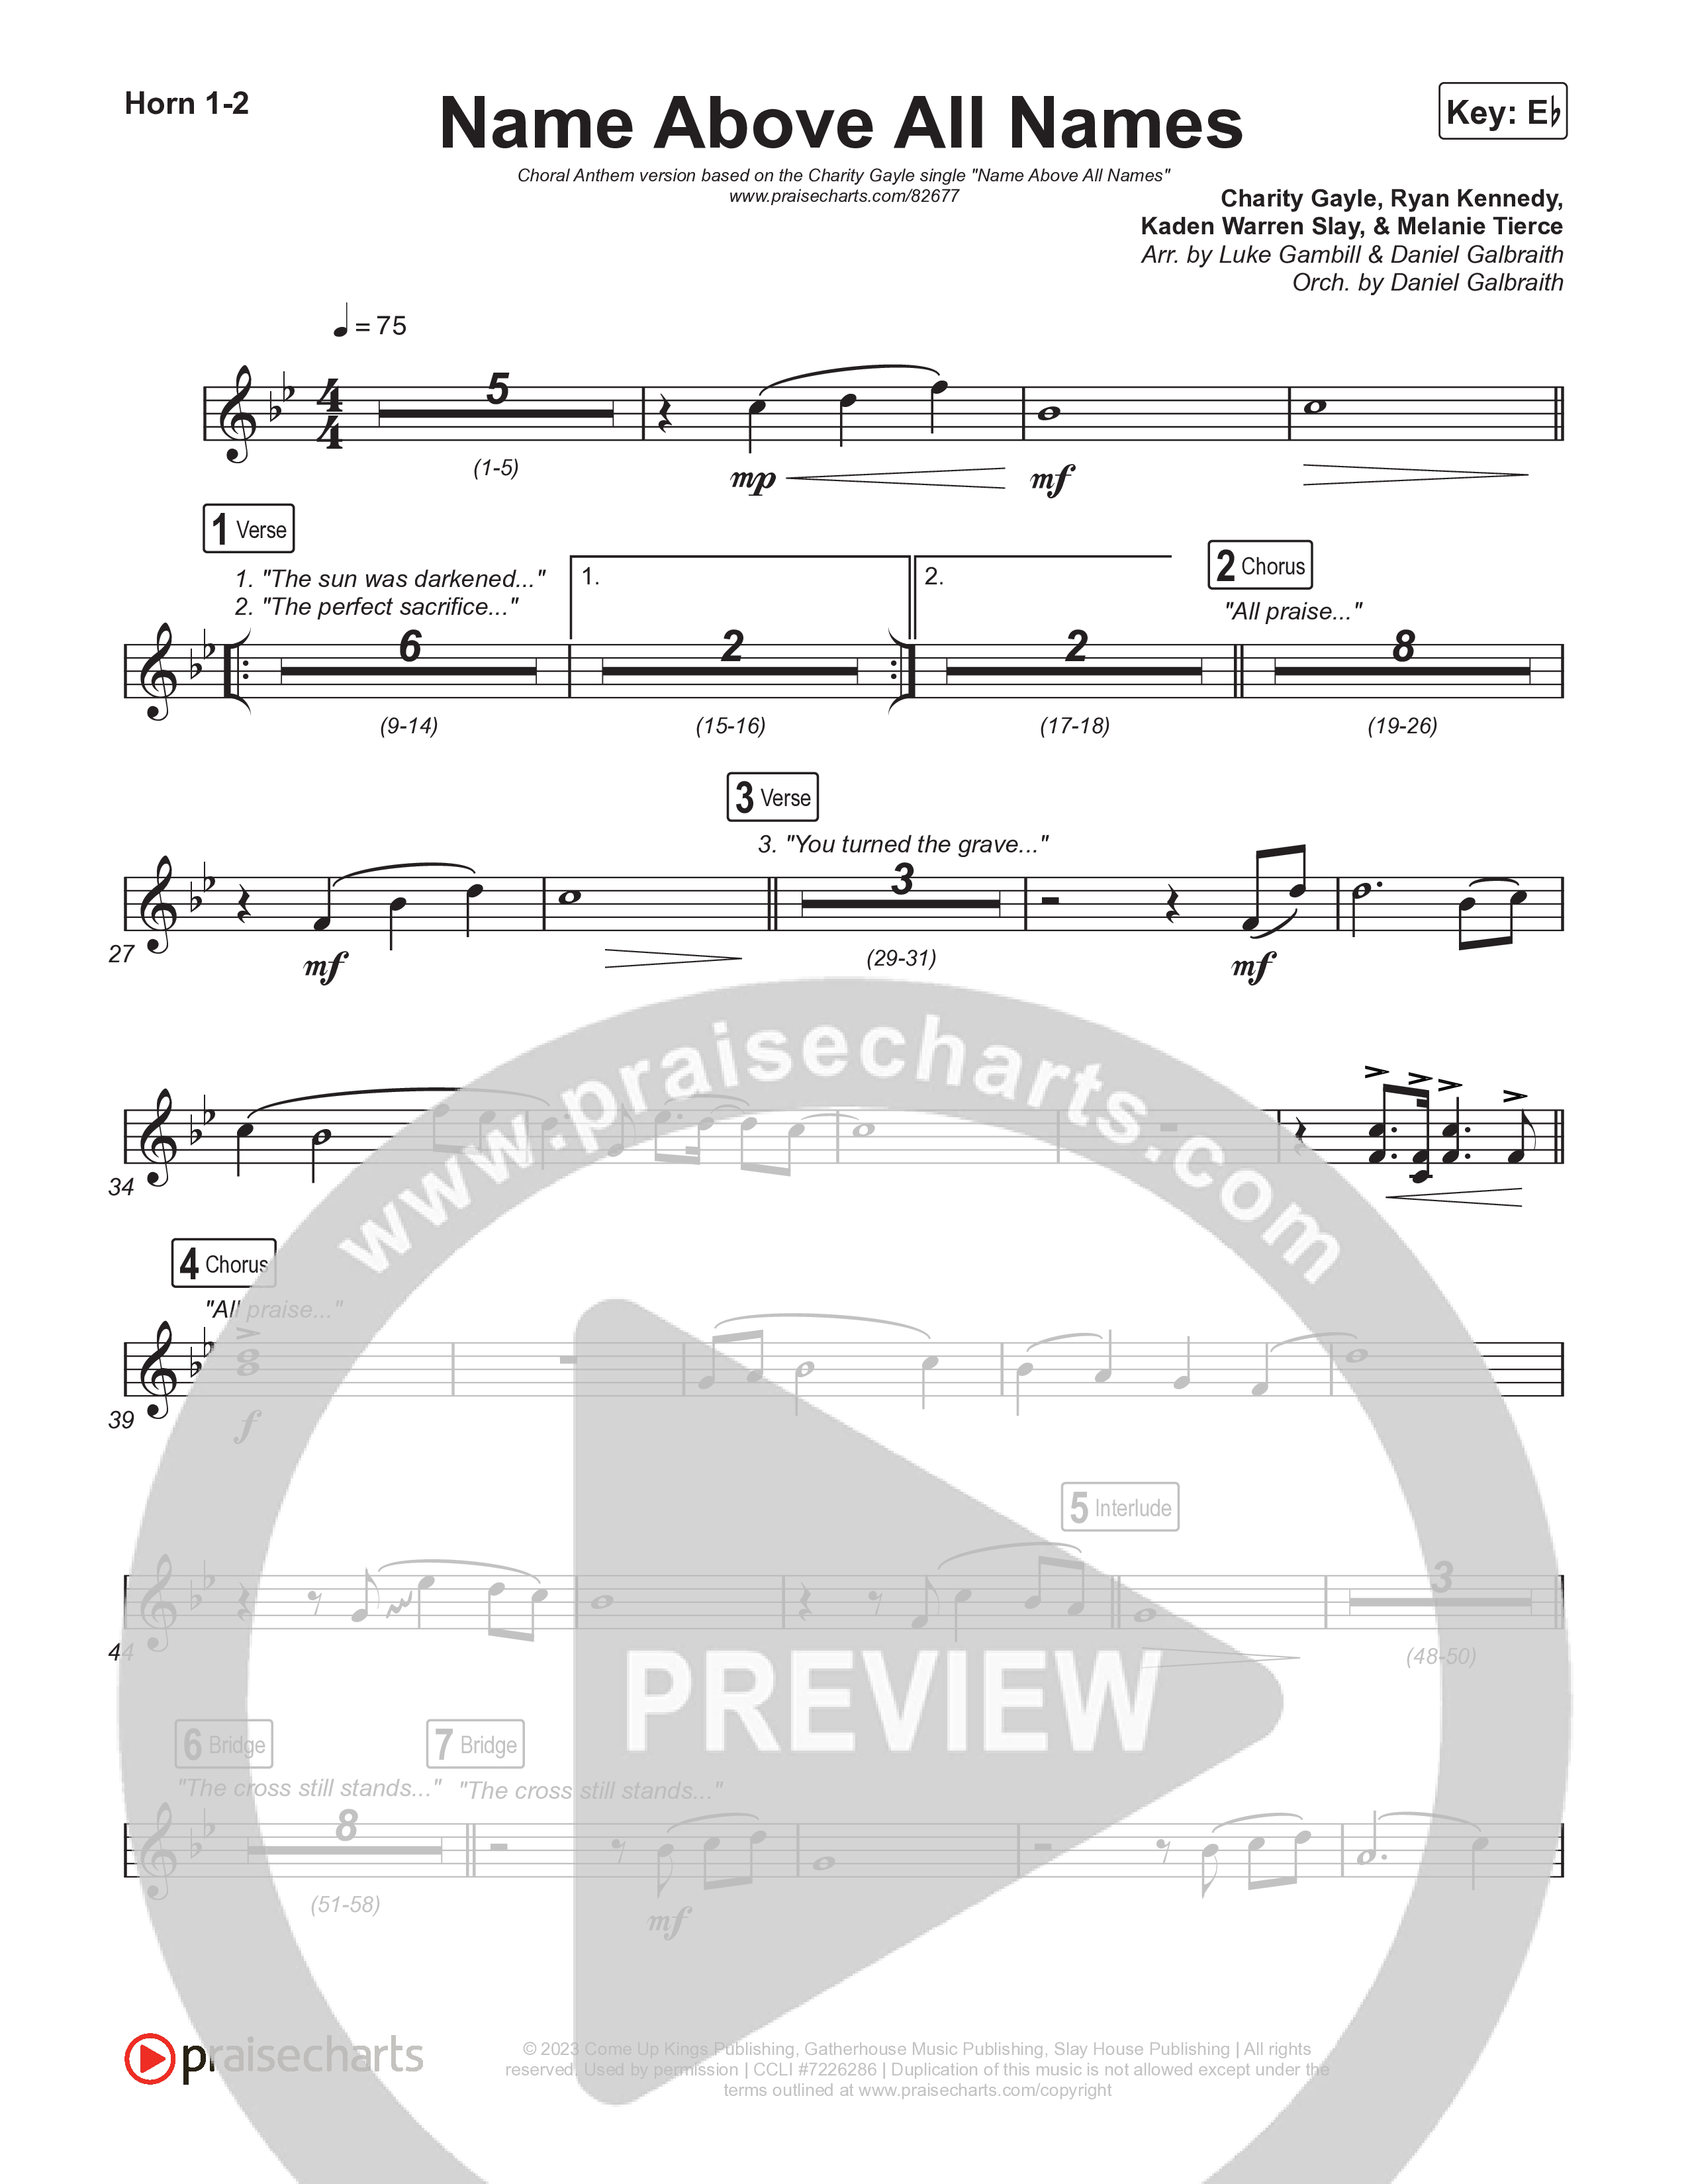 Name Above All Names (Choral Anthem SATB) French Horn 1,2 (Charity Gayle / Arr. Luke Gambill)